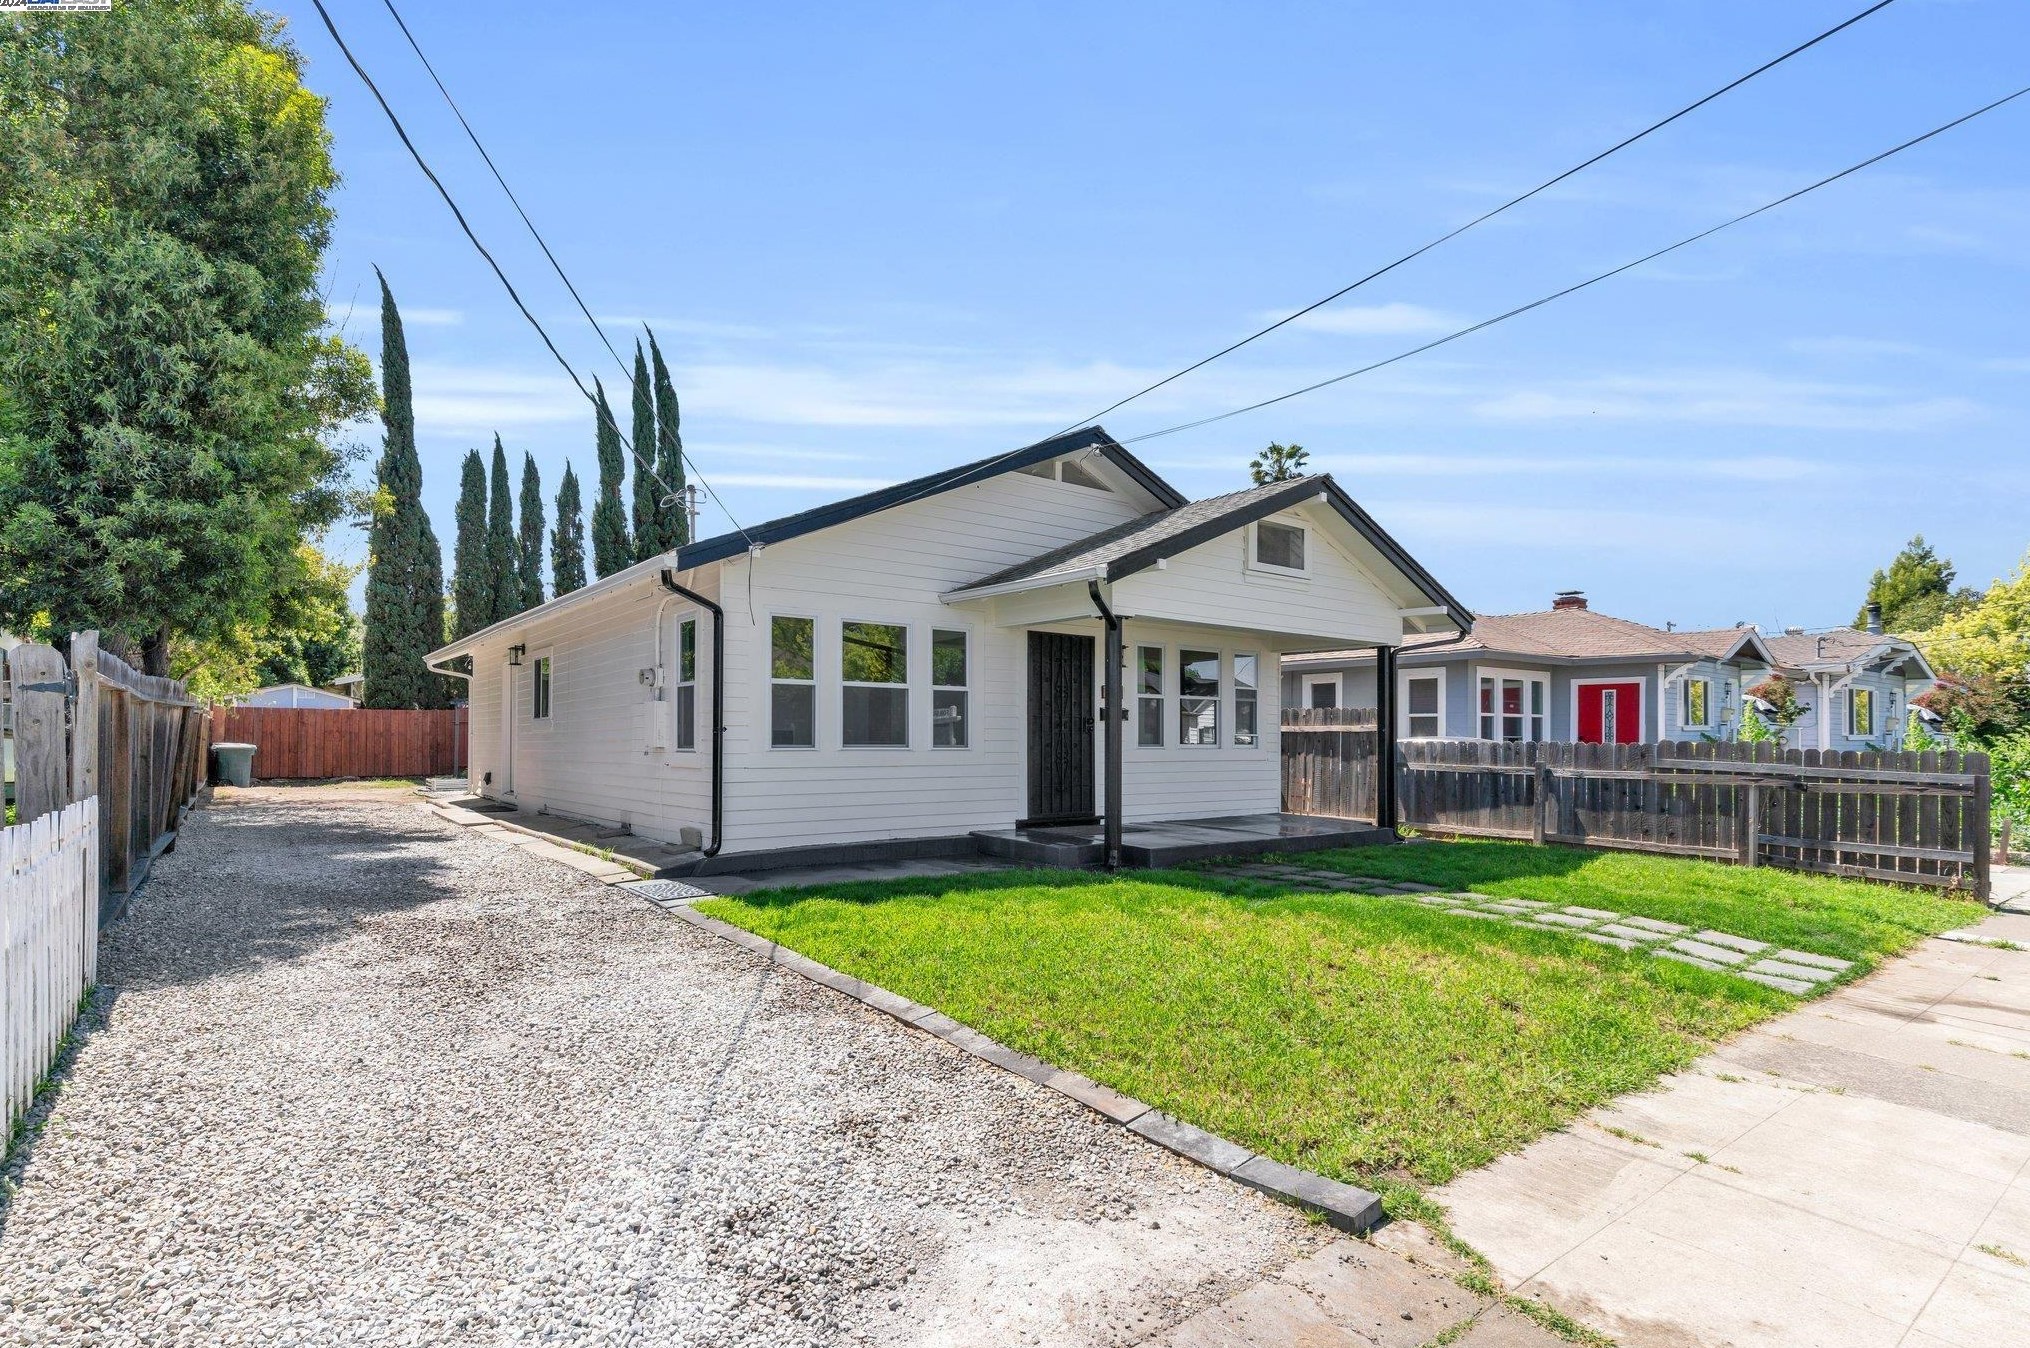 744 11th St, West Pittsburg, CA 94565